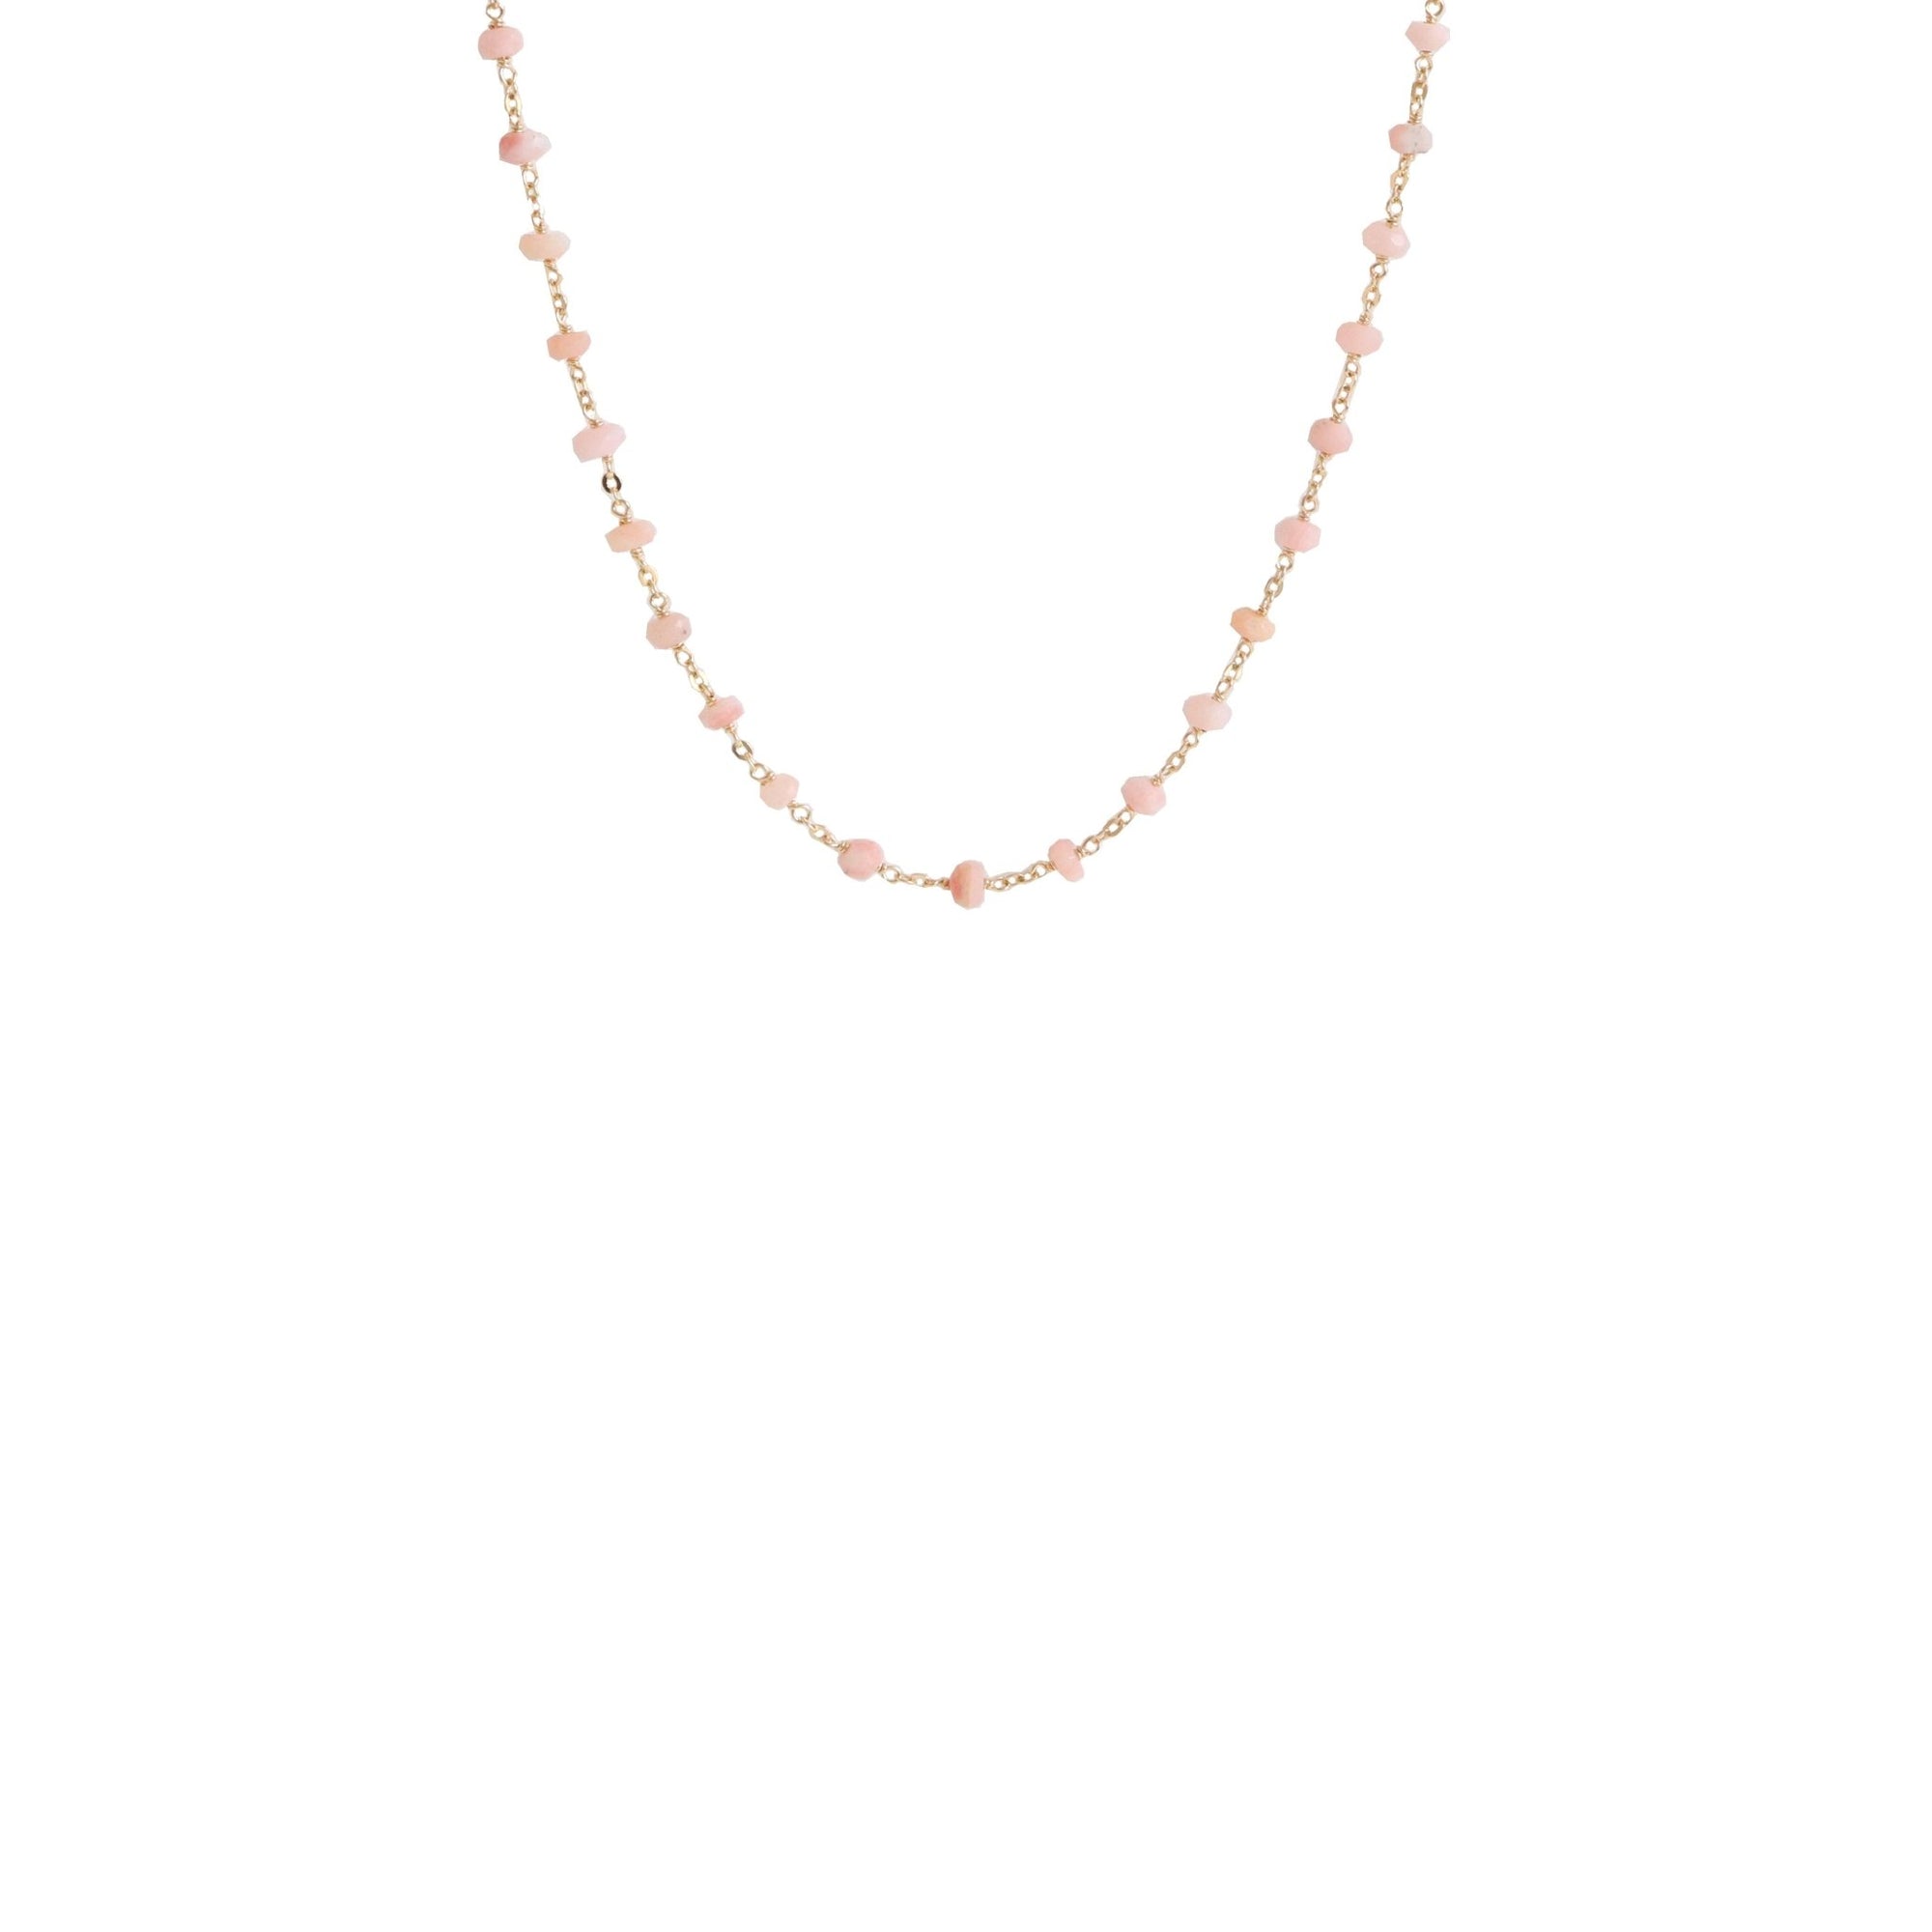 ICONIC SHORT BEADED NECKLACE - PINK OPAL & GOLD 16-20" - SO PRETTY CARA COTTER